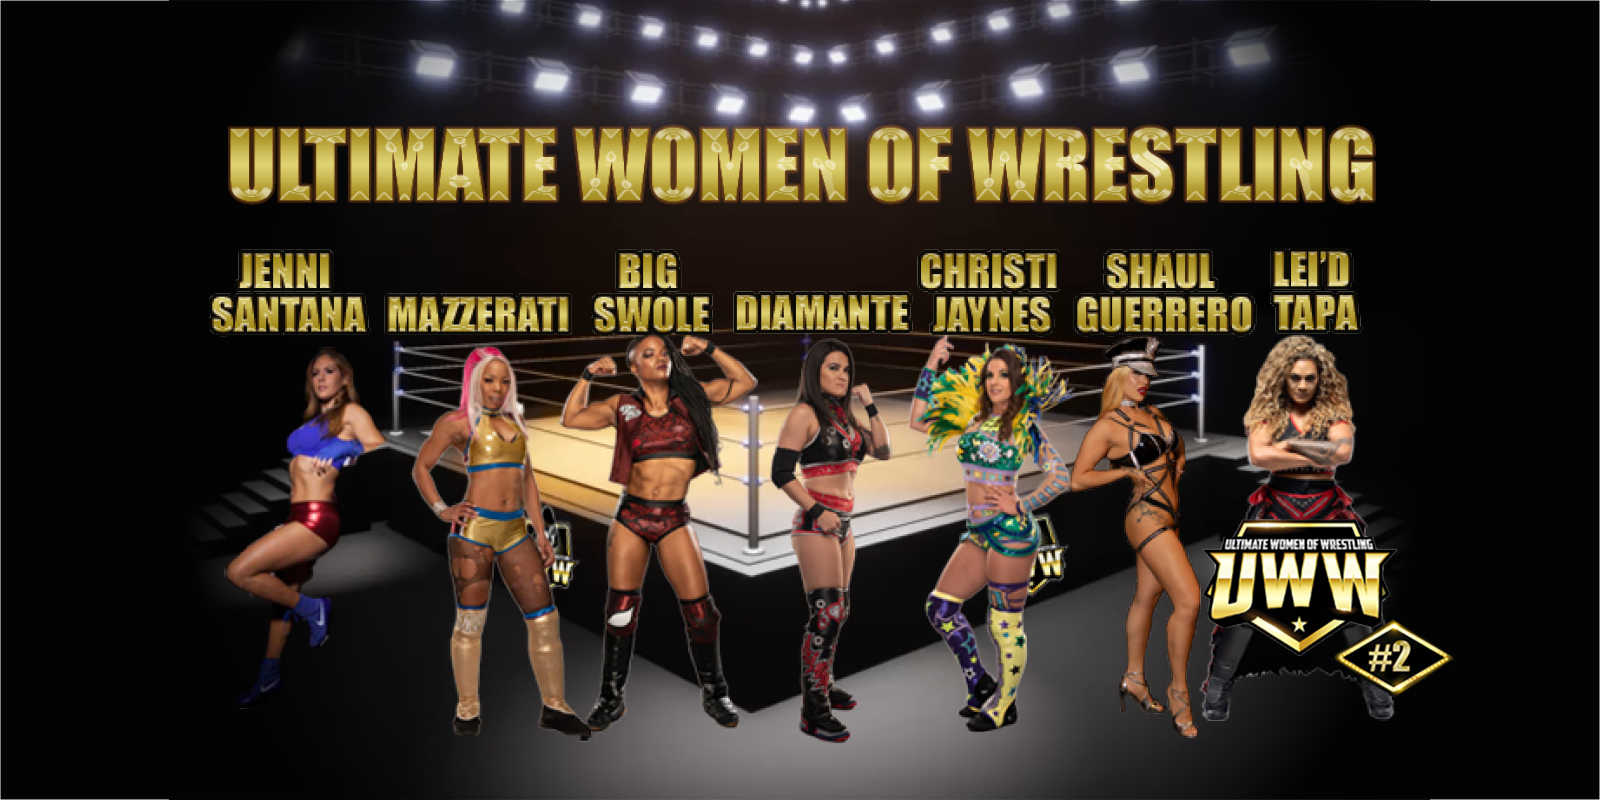 Ultimate Women of Wrestling with images of women wrestlers